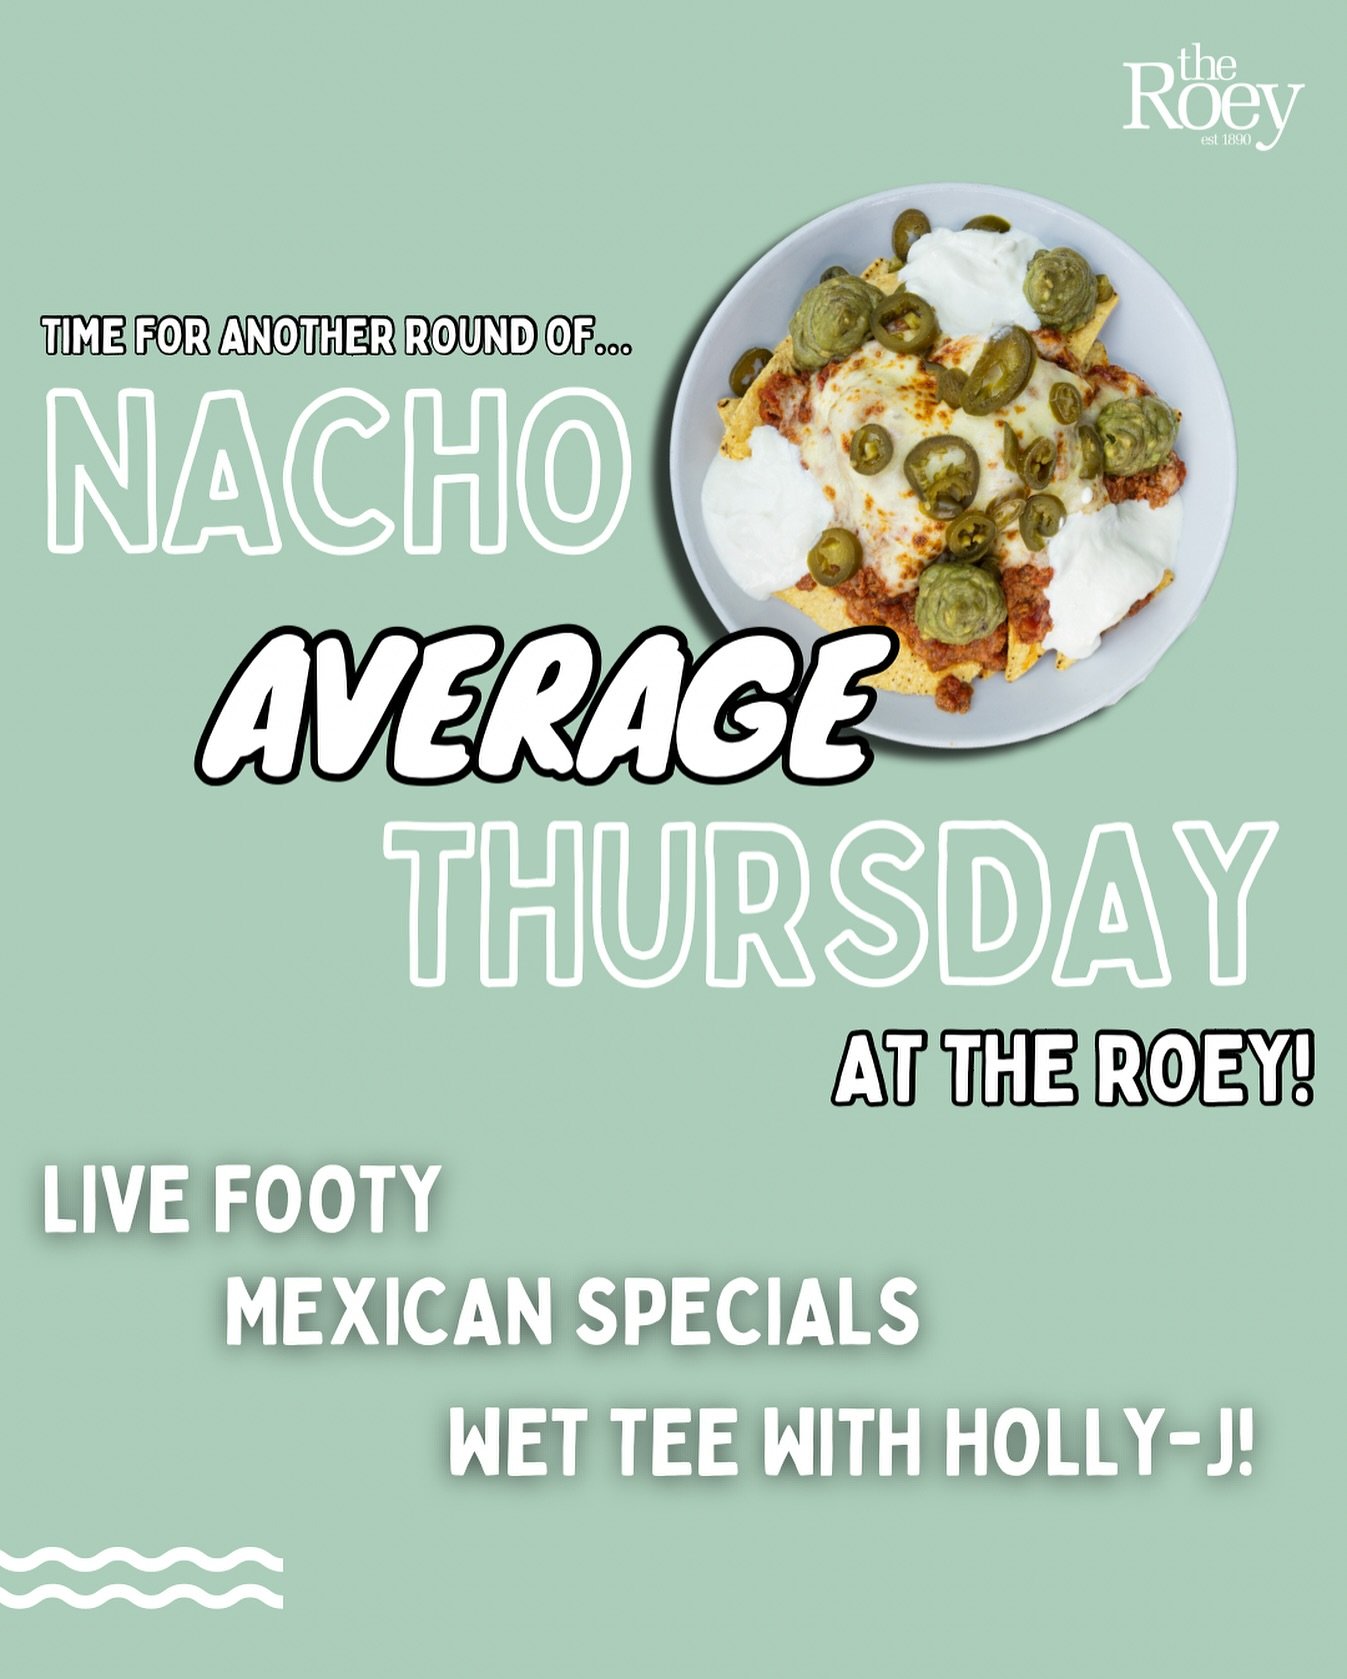 Its nearrrrlyyyyy Friday, which means its time for another round of NACHO AVERAGE THURSDAY at The Roey 🙌🏽

NOW 👉🏽 Mexican Thursdays 🌮 in the Sports Bar &amp; Pearlers. $20 Tacos, $24 Nachos, $33 buckets of Corona

SOON 👉🏽 Catch the SUNS vs CAT